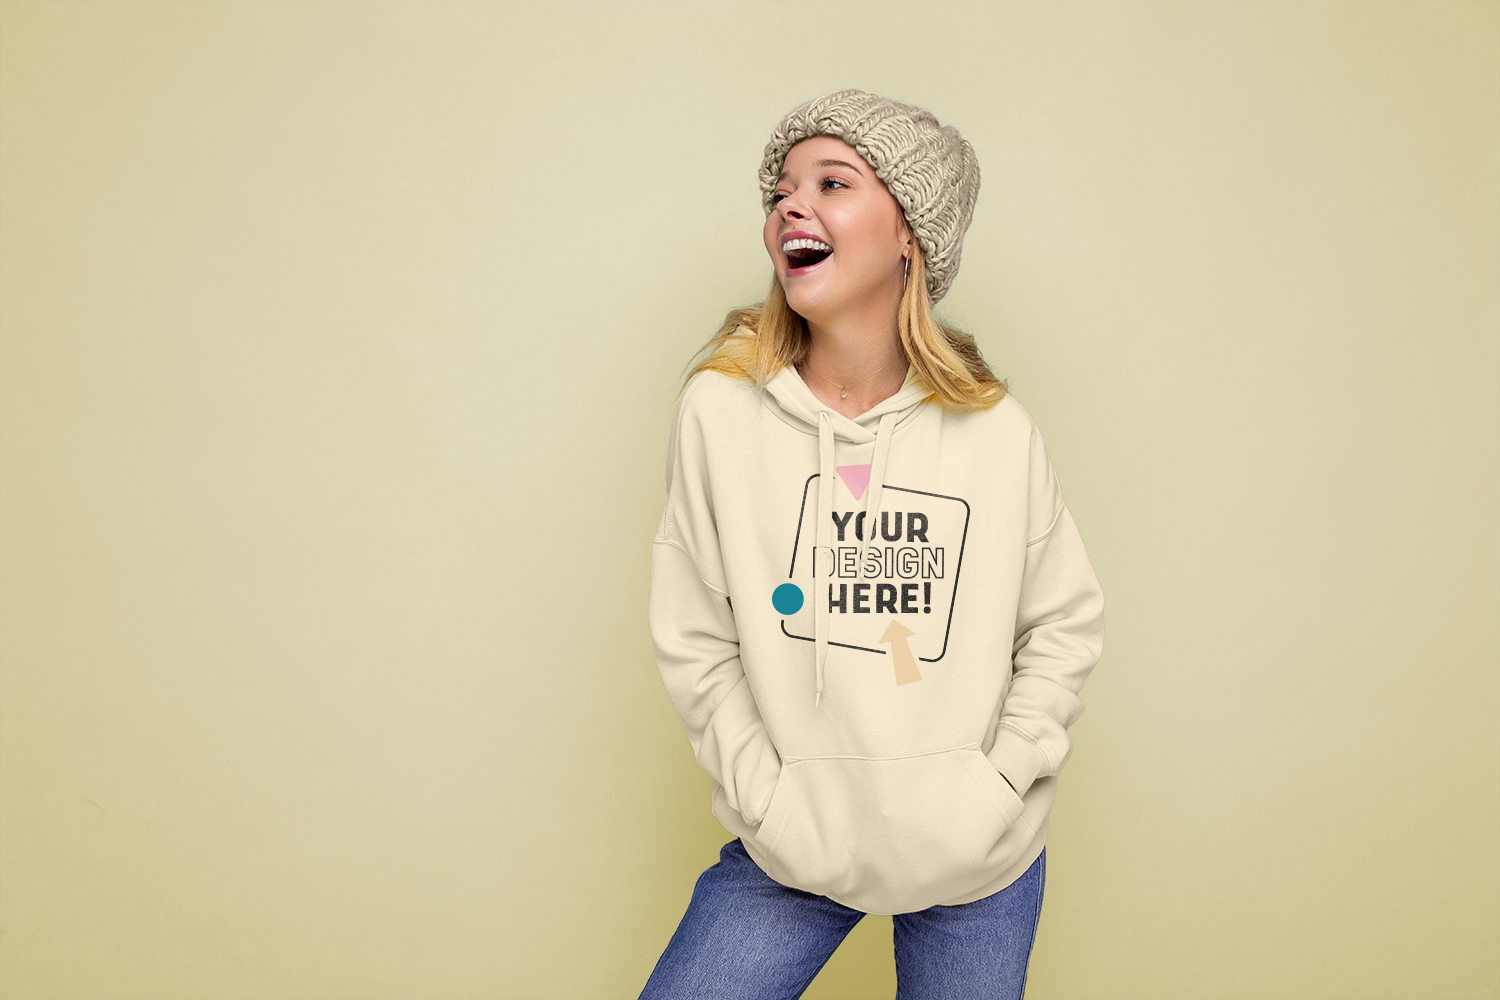 Print and personalize hoodies with ShirtUp!